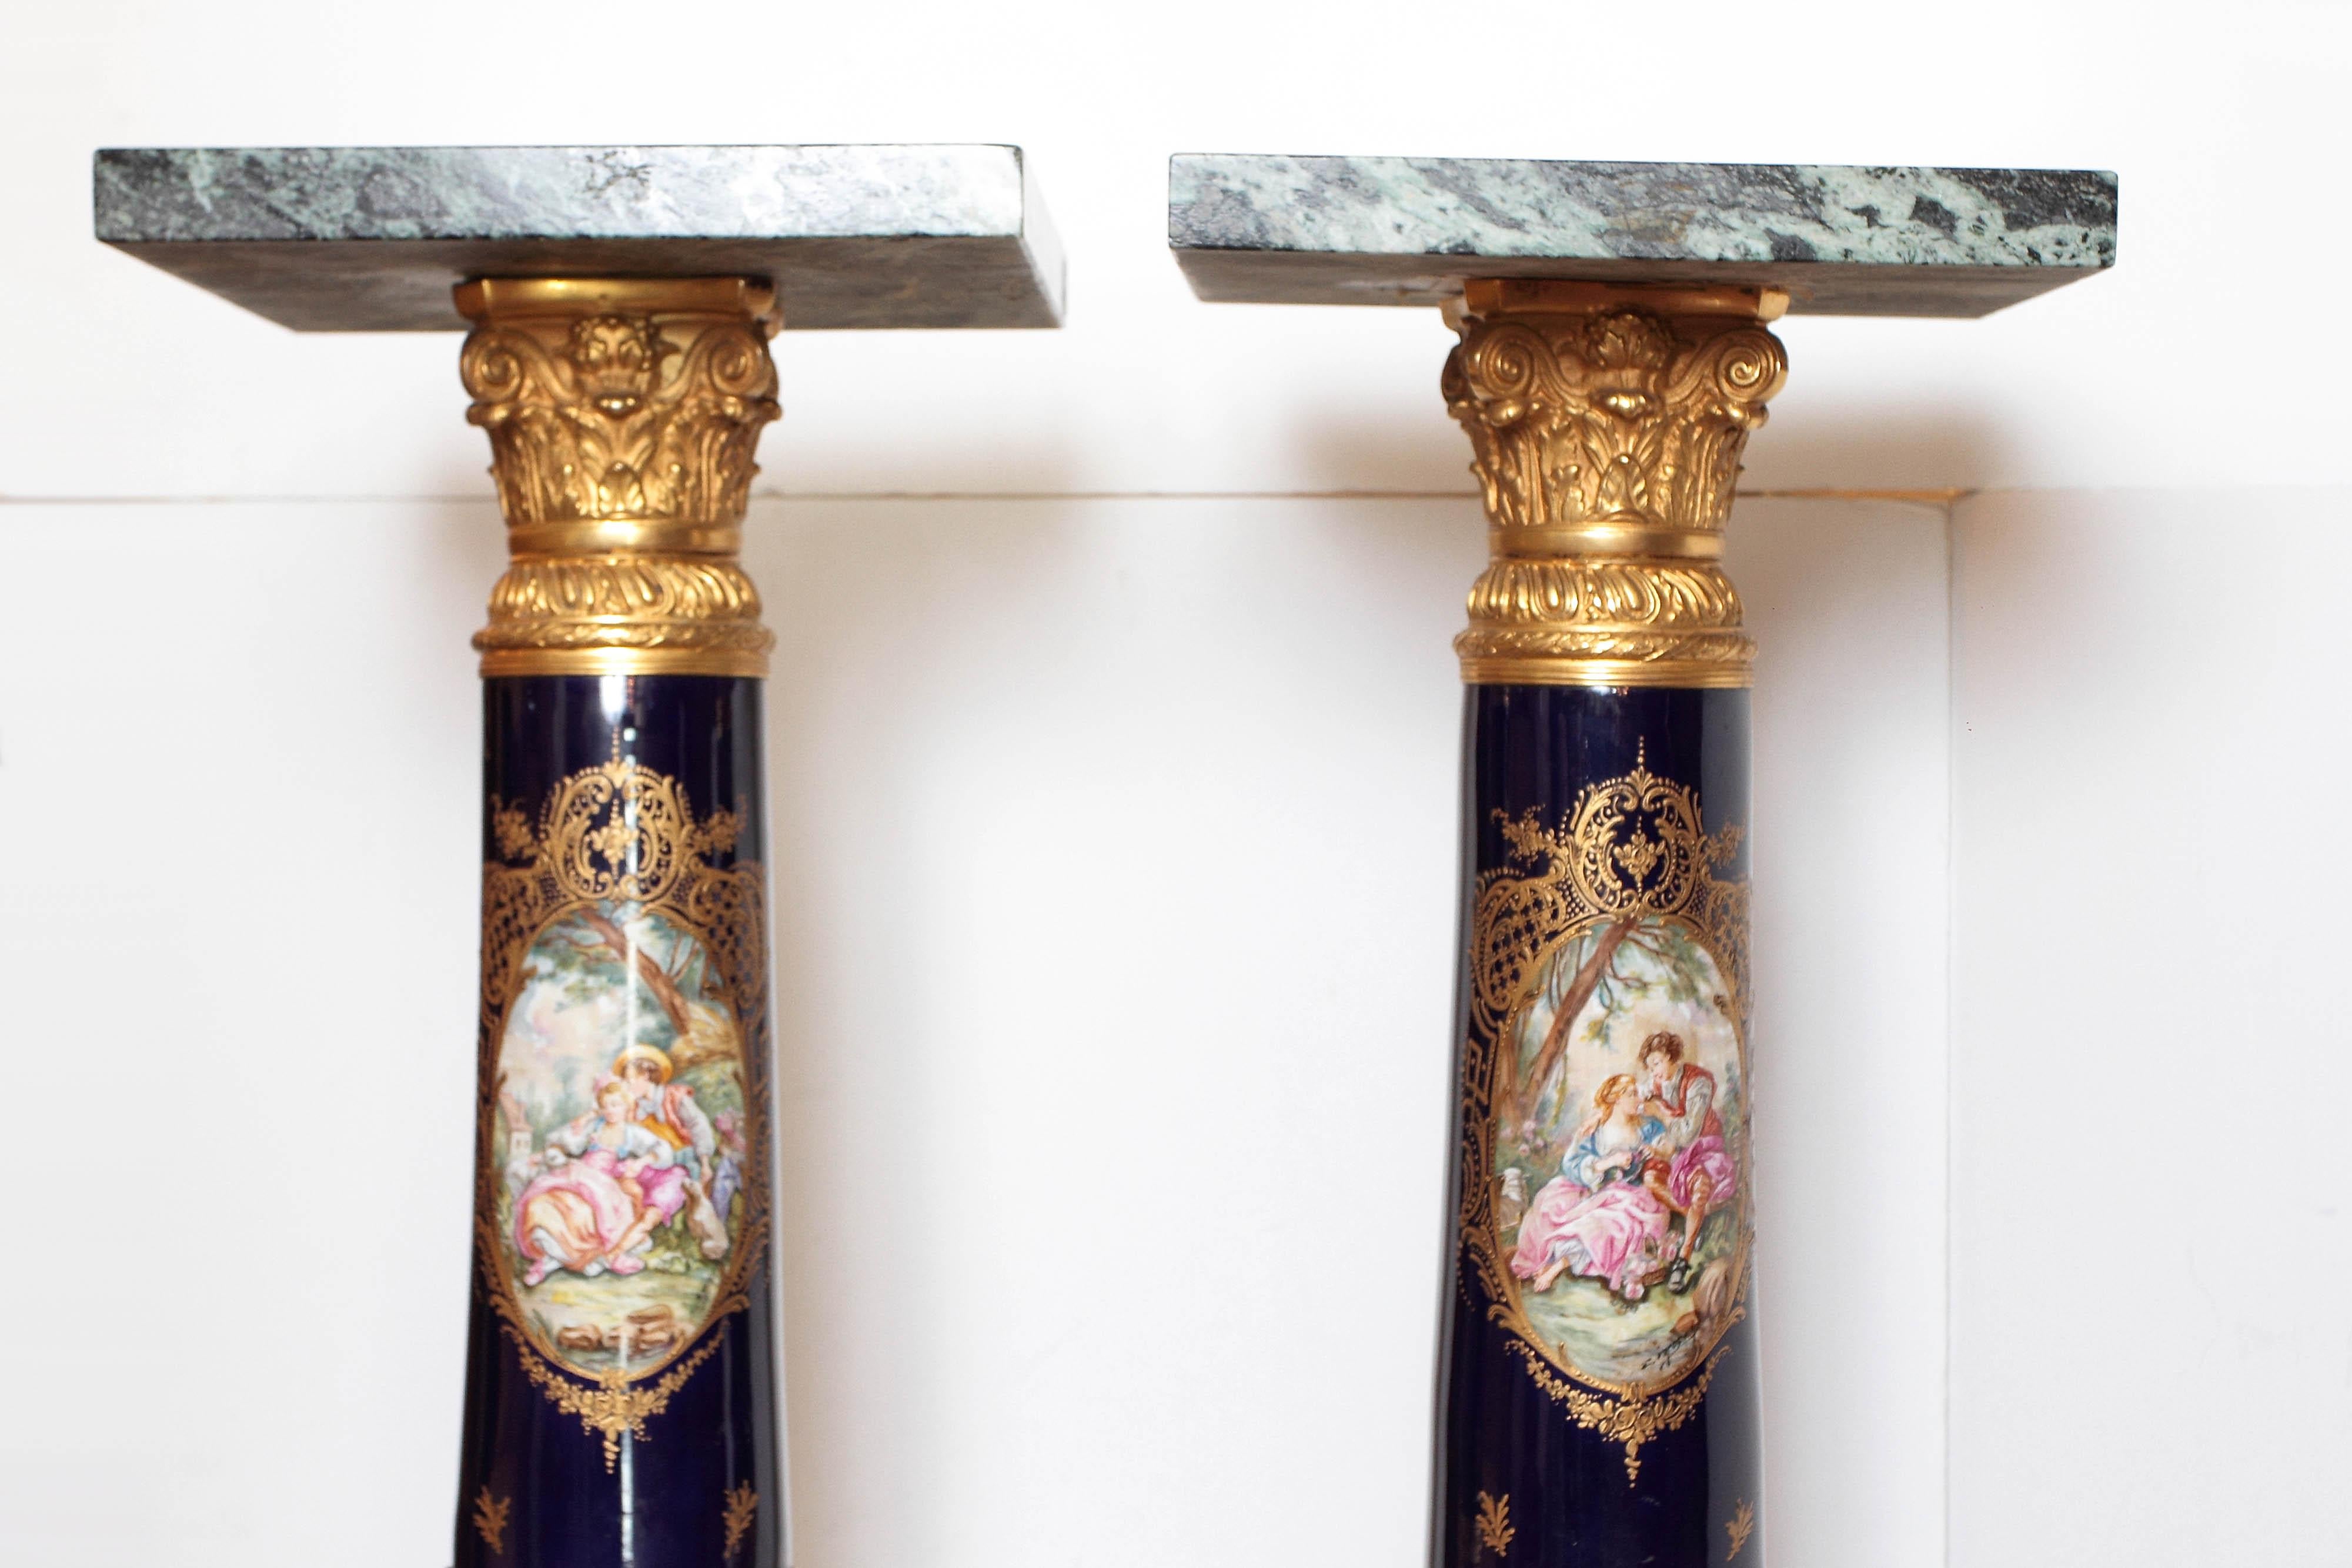 Pair of 19th century French porcelain hand-painted and signed pedestals with marble tops.